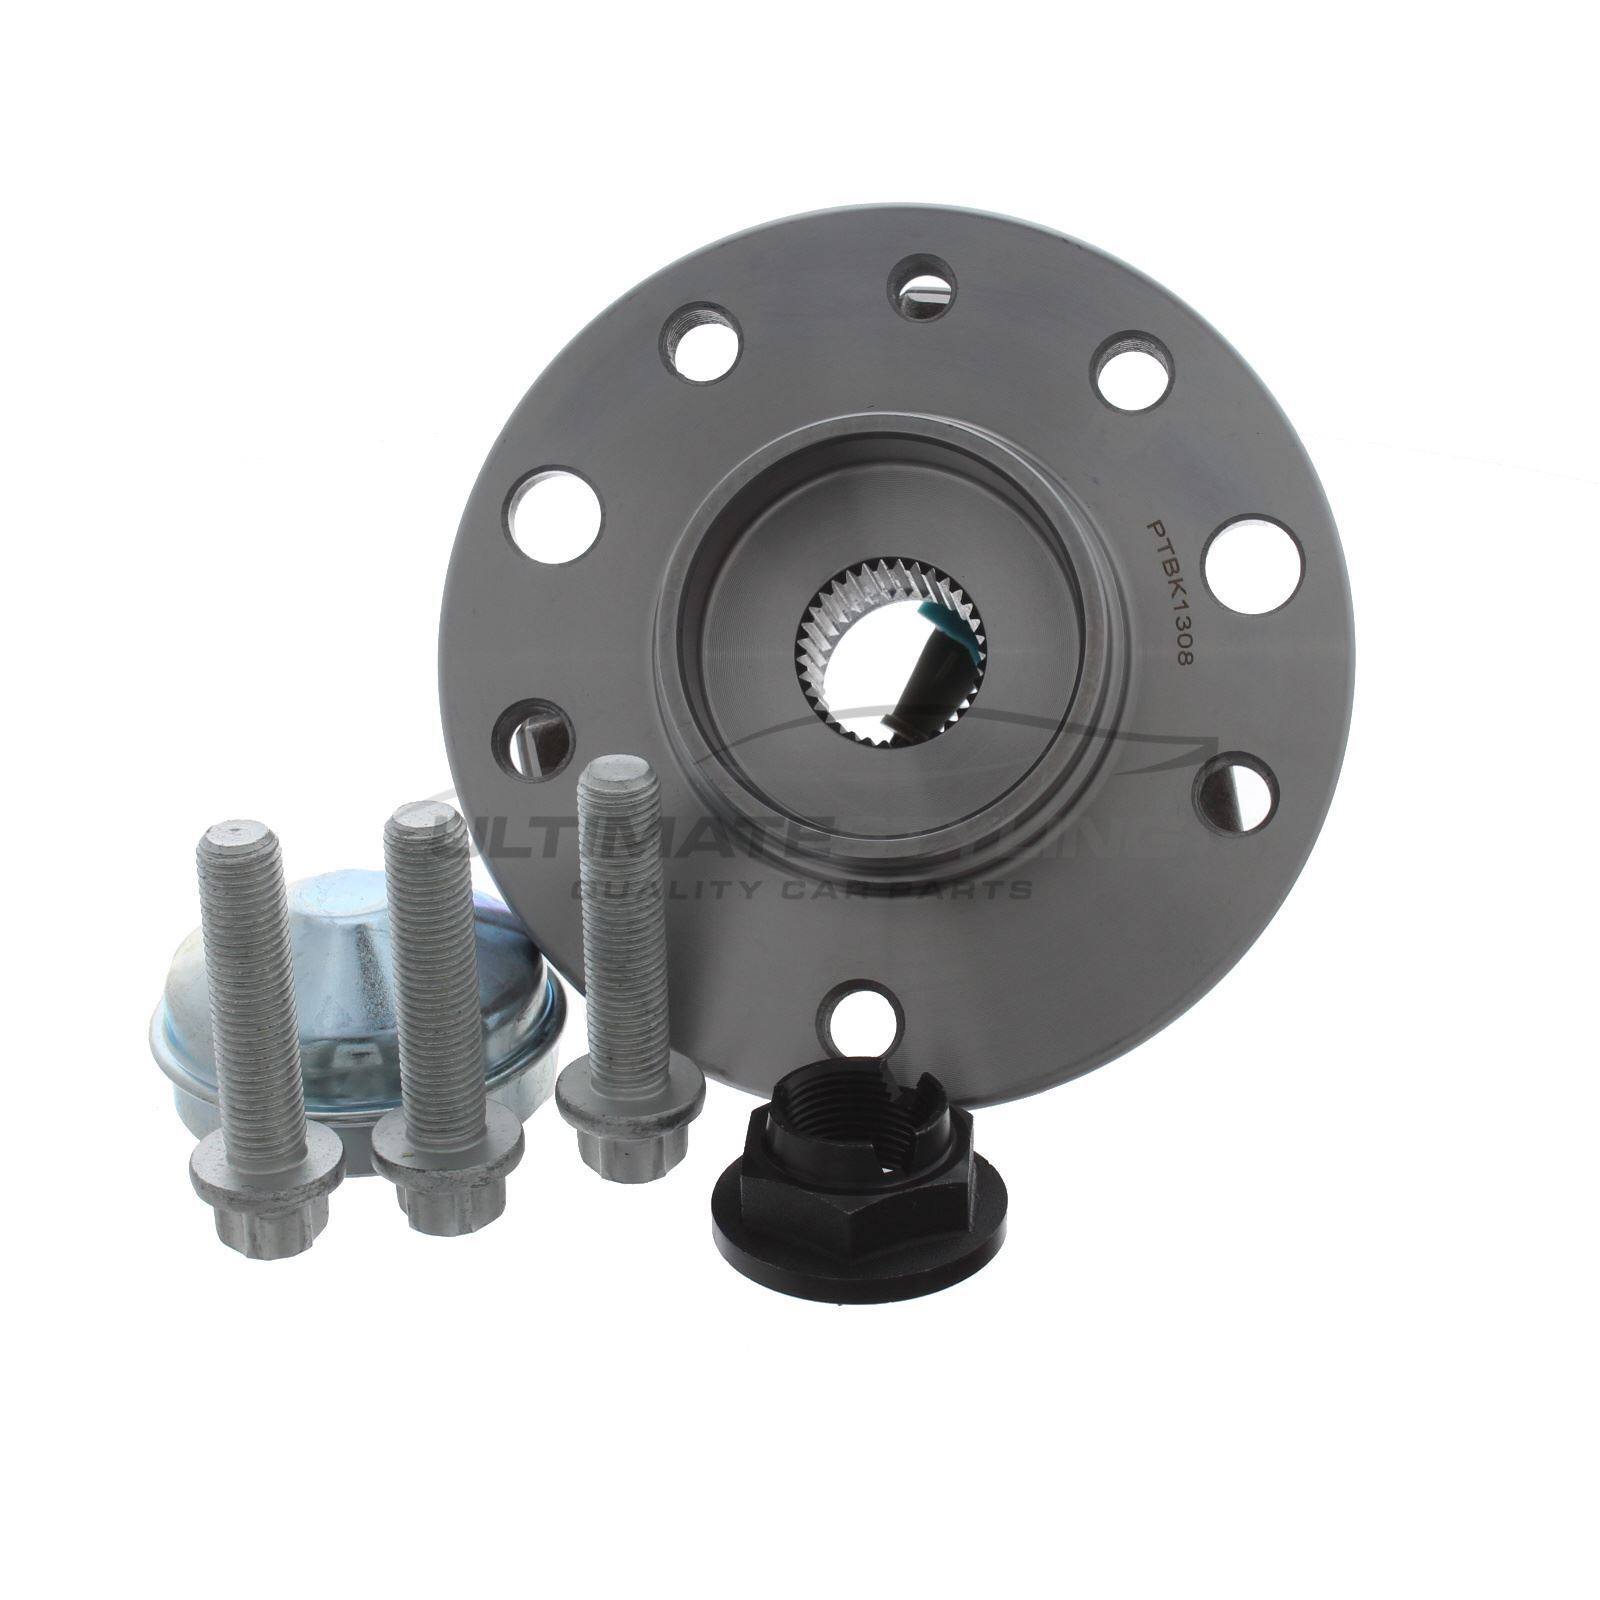 Front Wheel Bearing Hub Kit With ABS Vauxhall Astra H Mk5 2004-2011 5 Stud 25mm